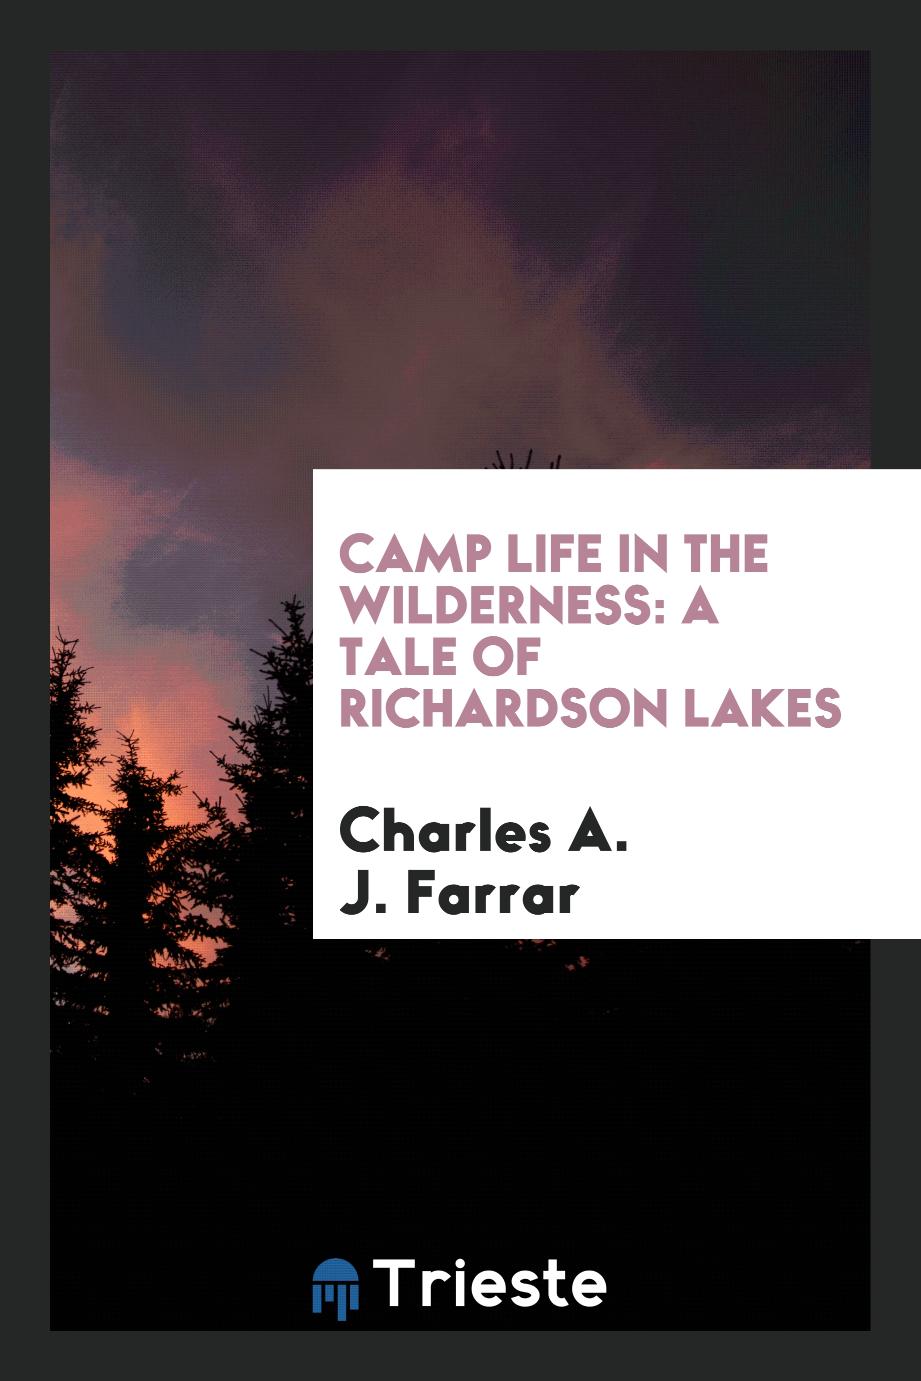 Camp life in the wilderness: a tale of Richardson Lakes